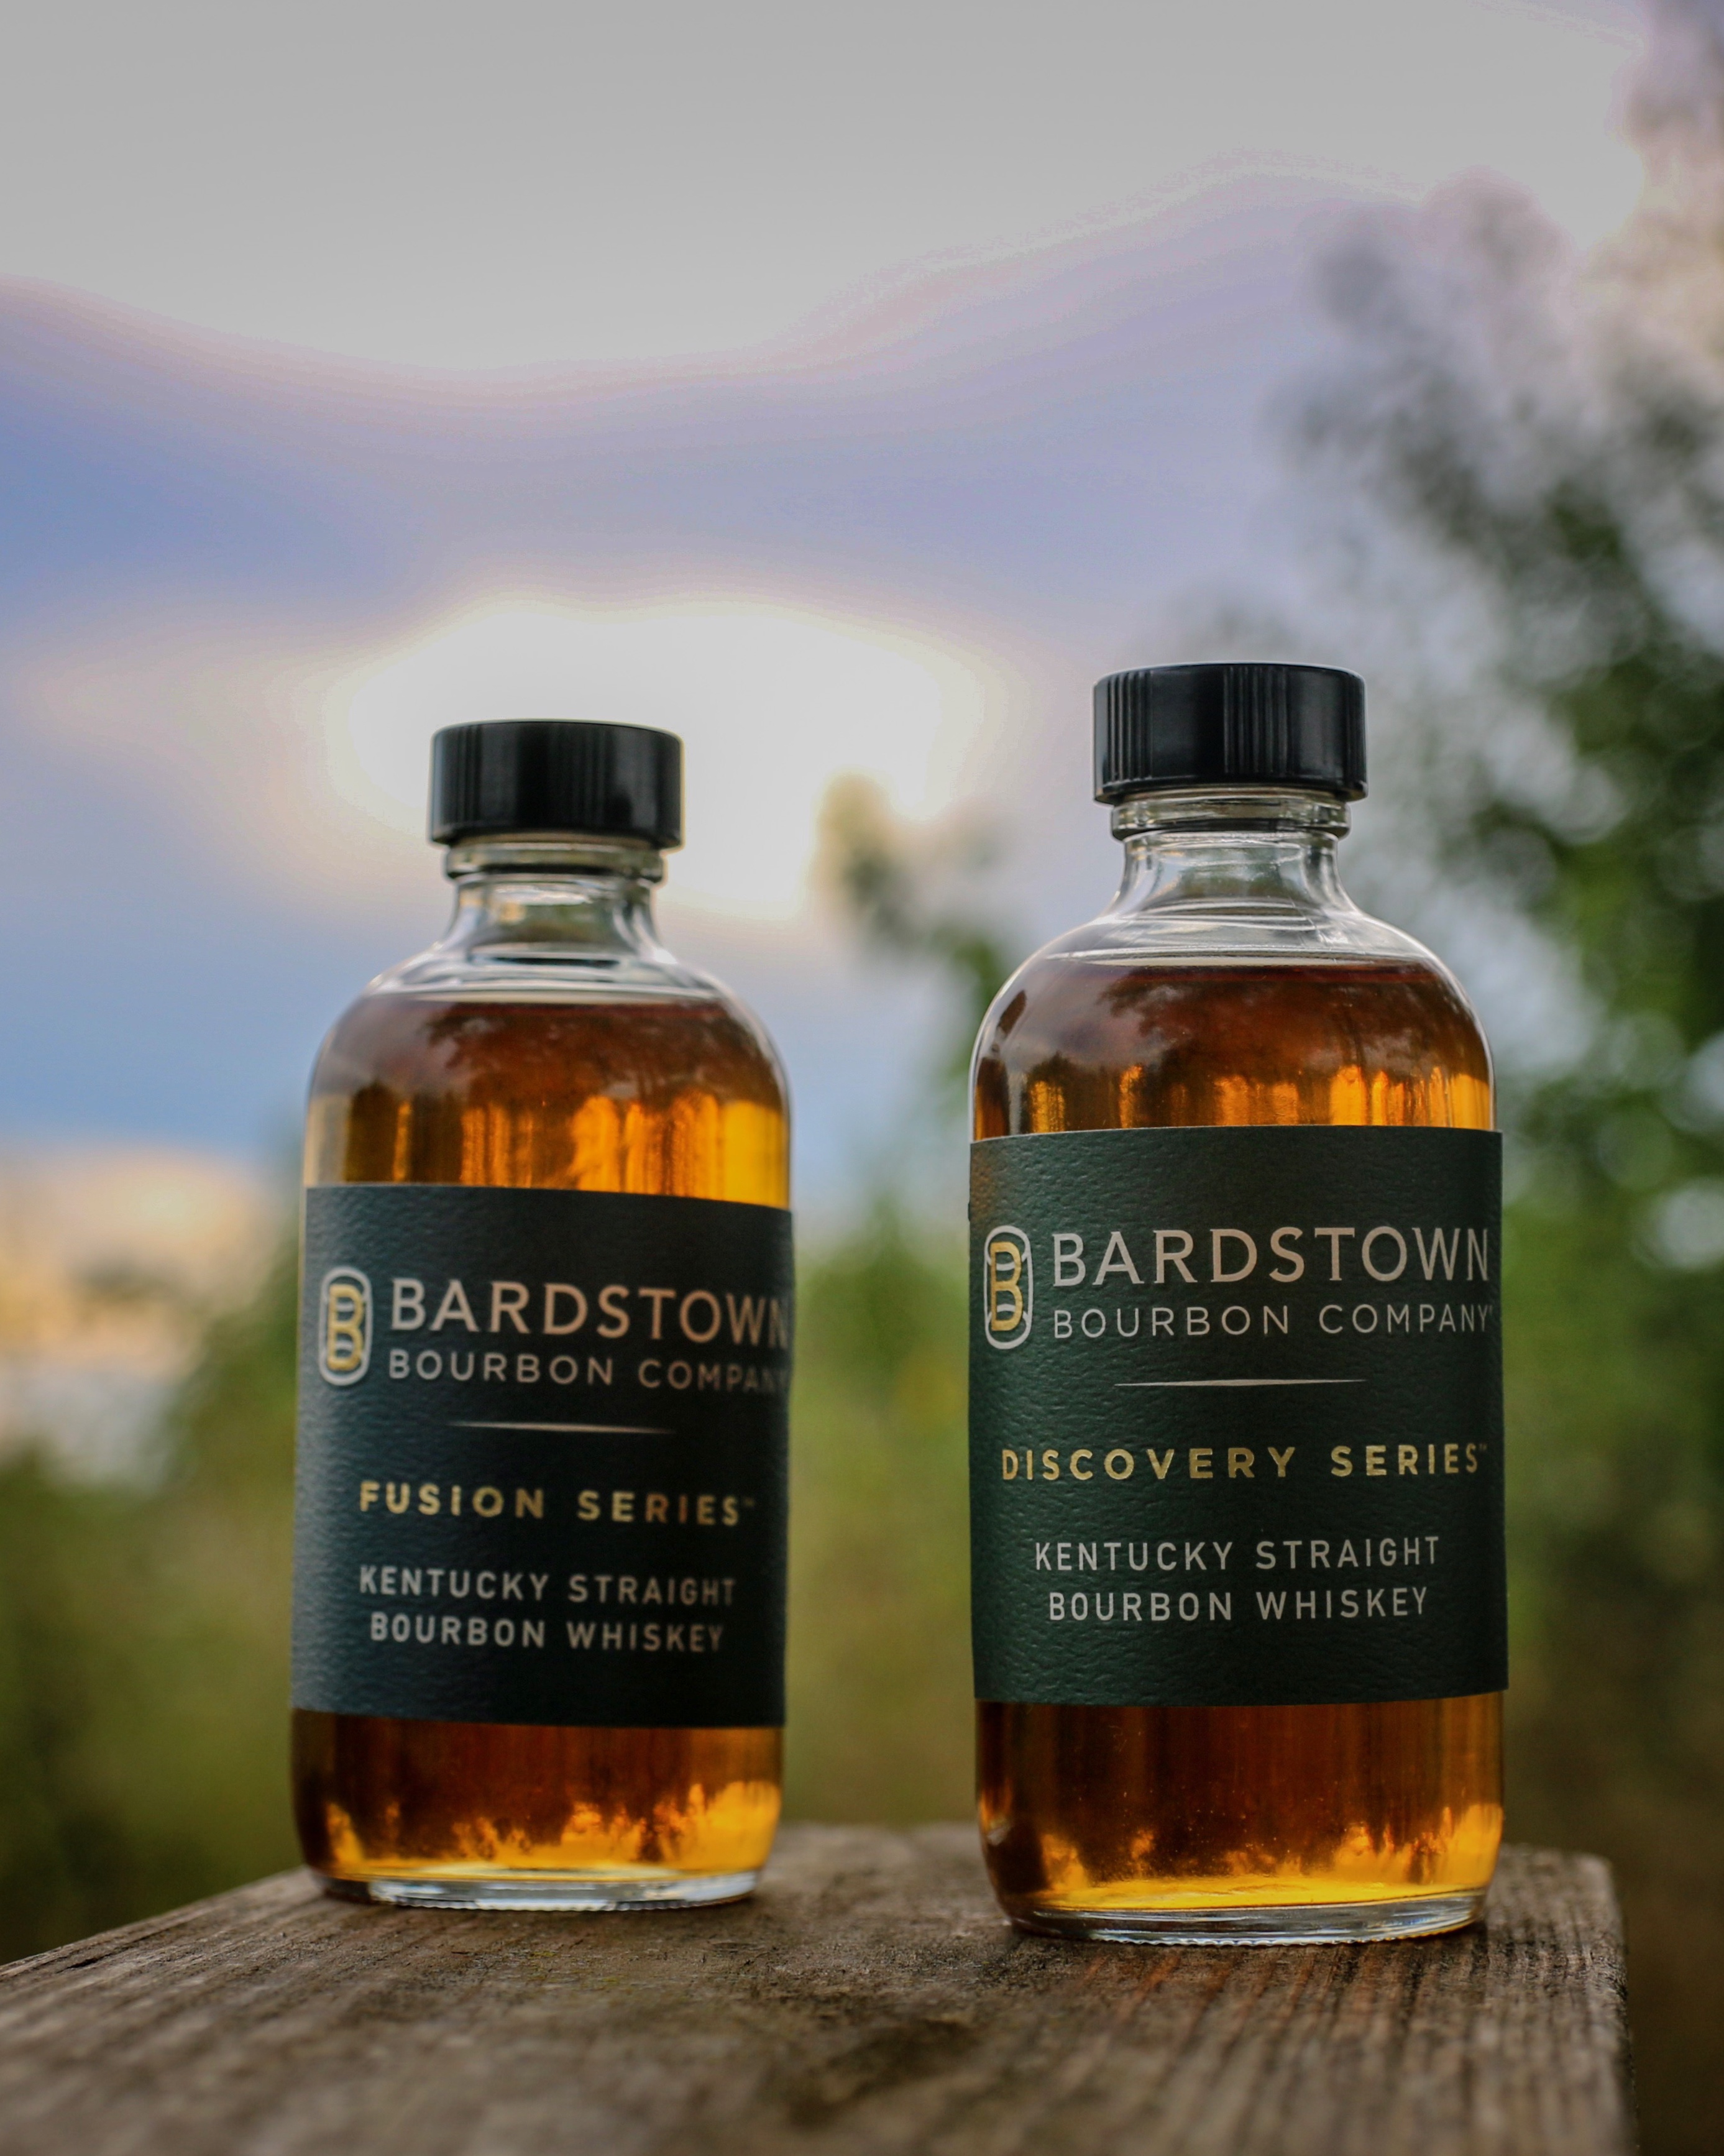 31: Discover Bardstown Bourbon Company